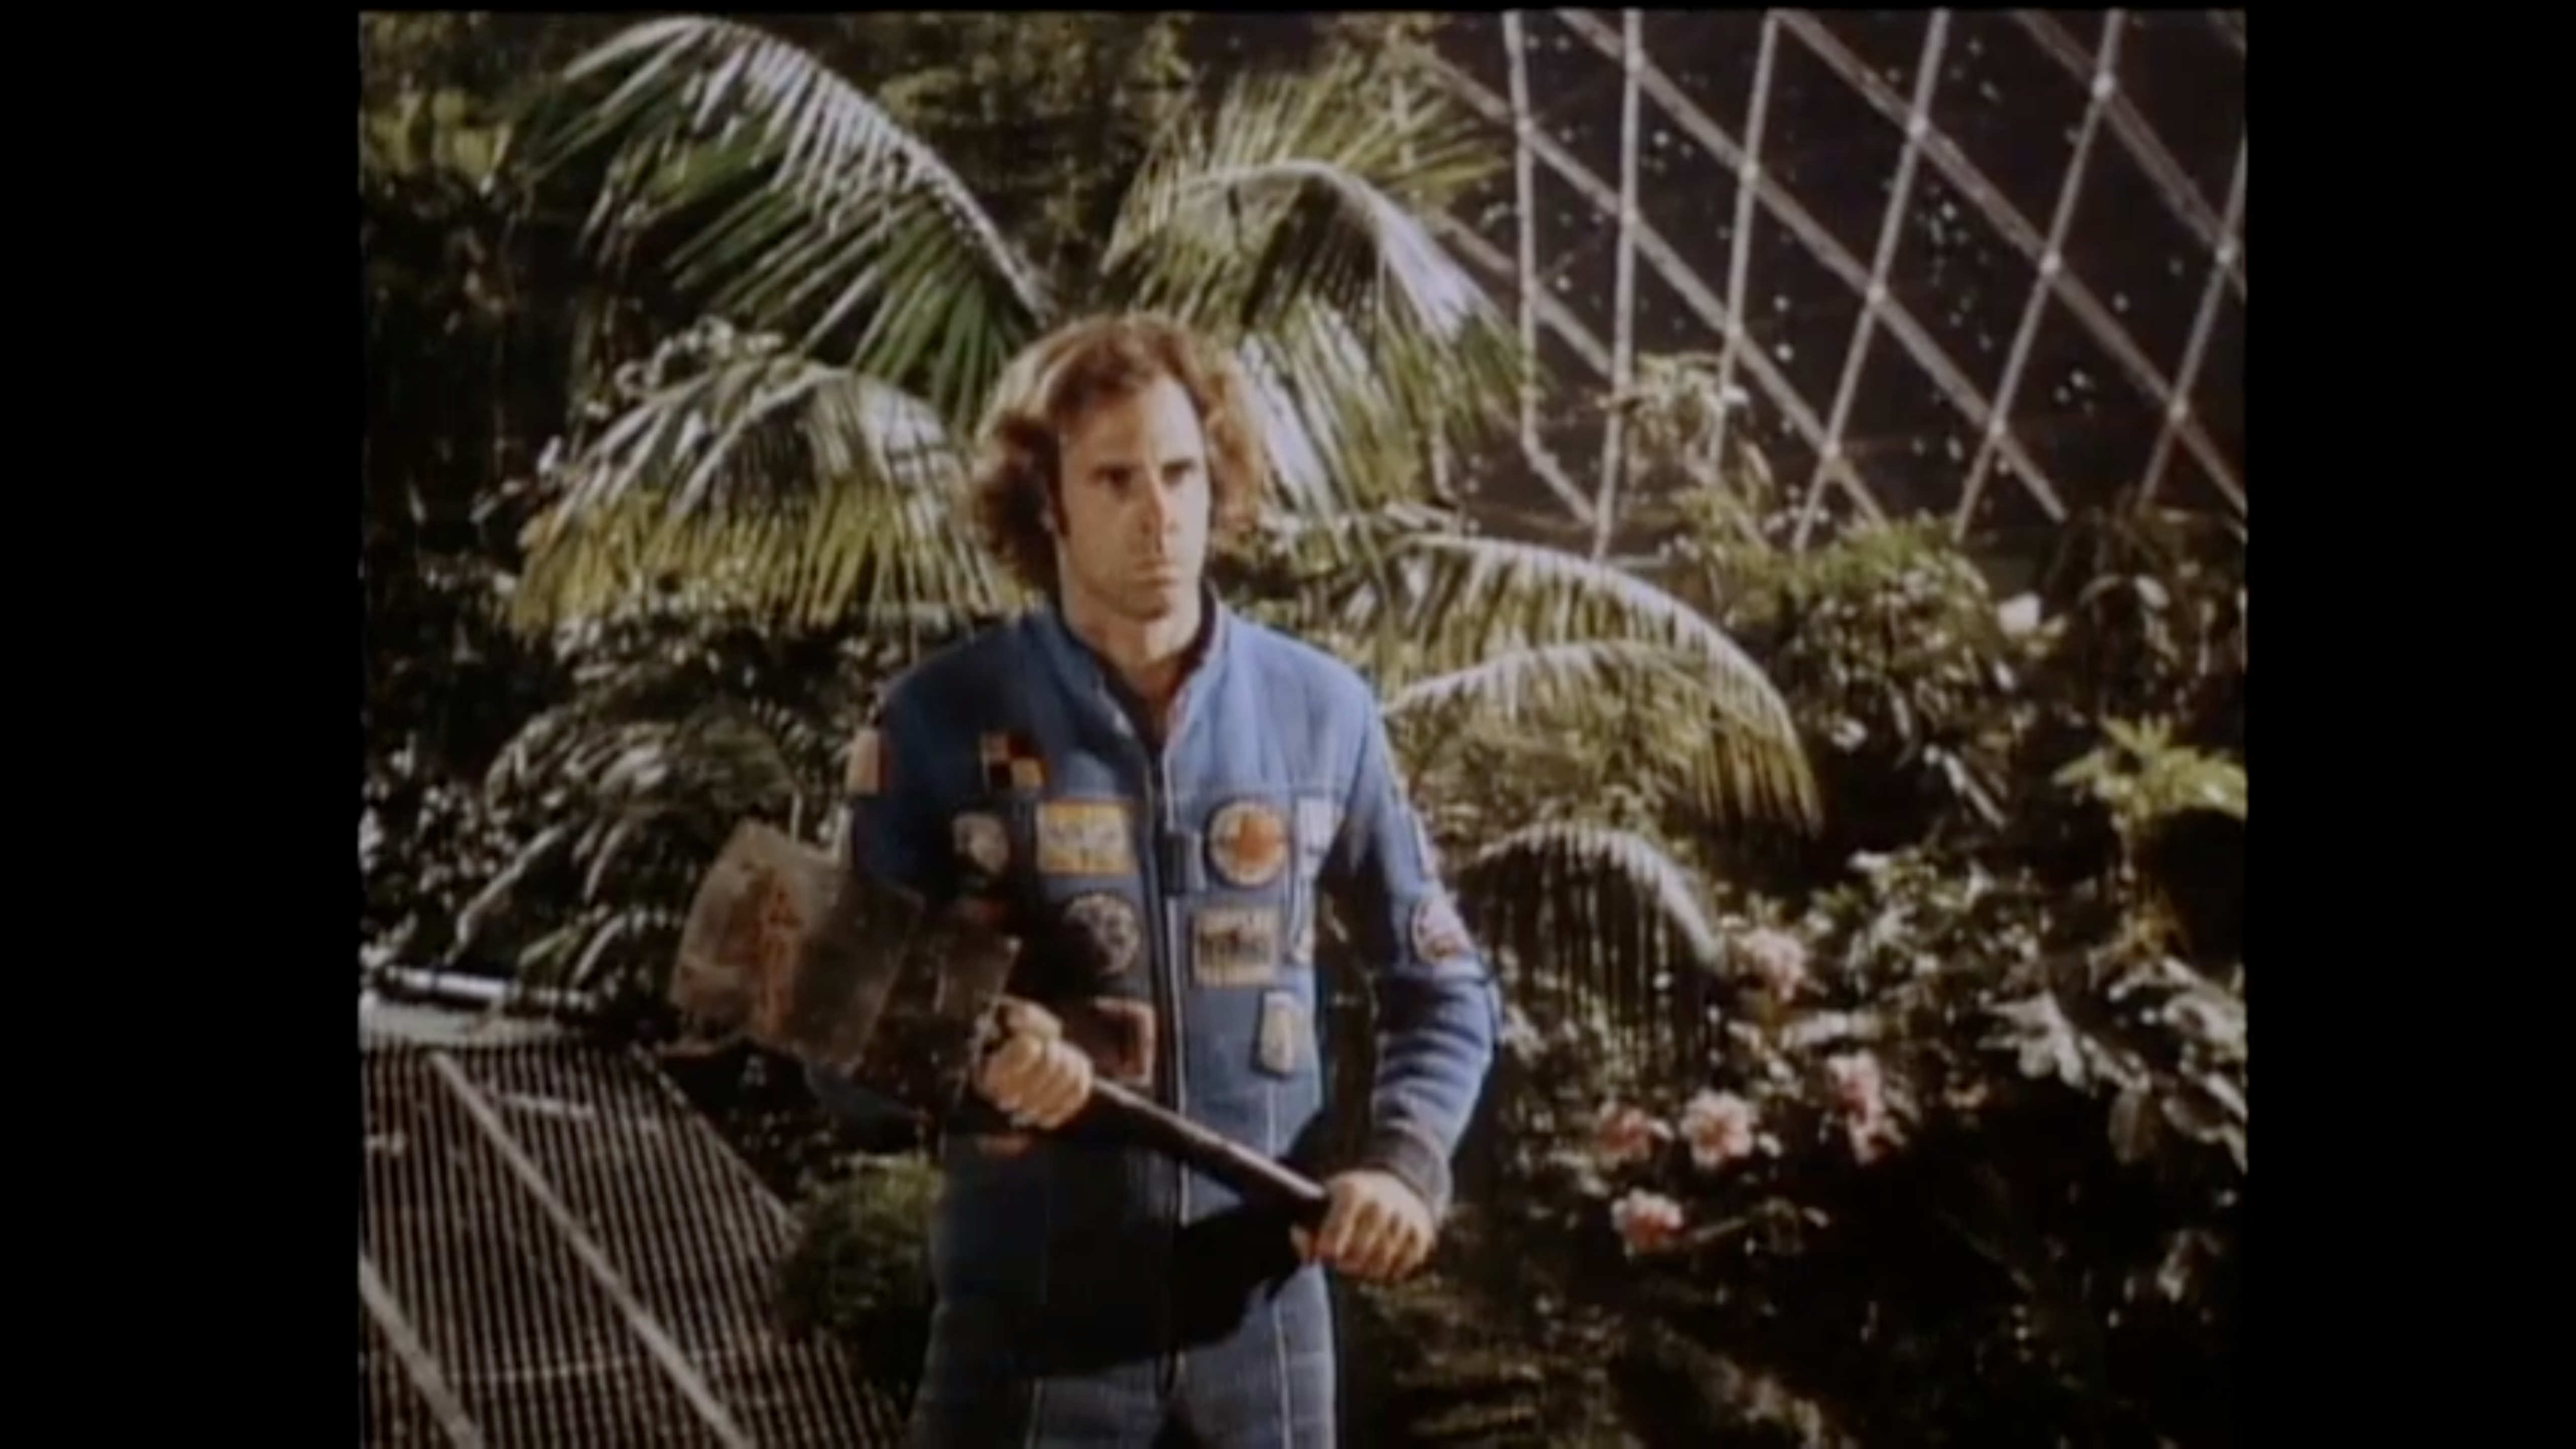 A screenshot of a video of a man walking menacingly with an axe in hand, in front of a background of lush garden within a domed structure.